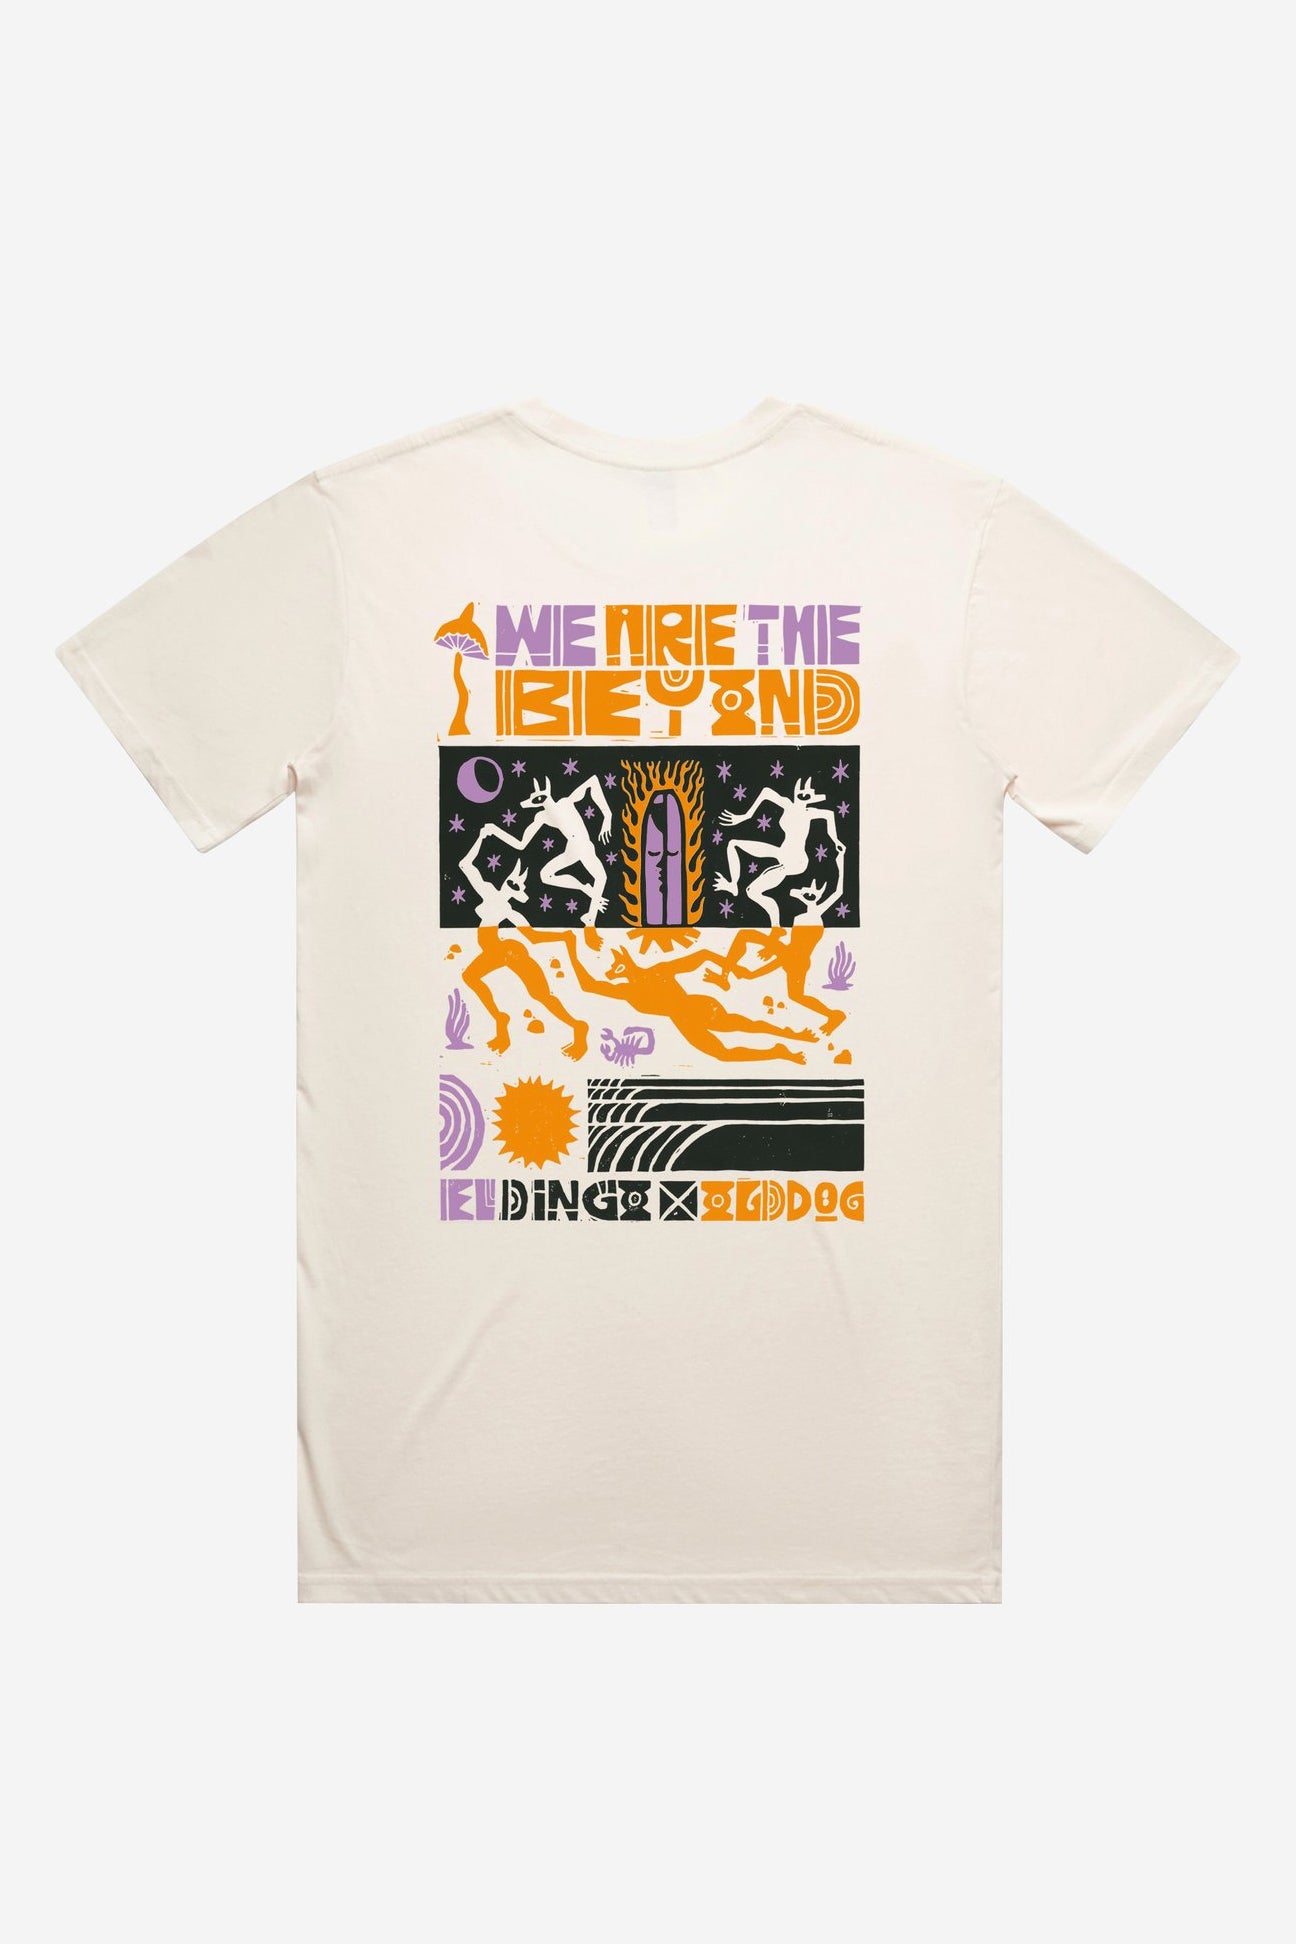 We Are The Beyond Artists Tee - El Dingo